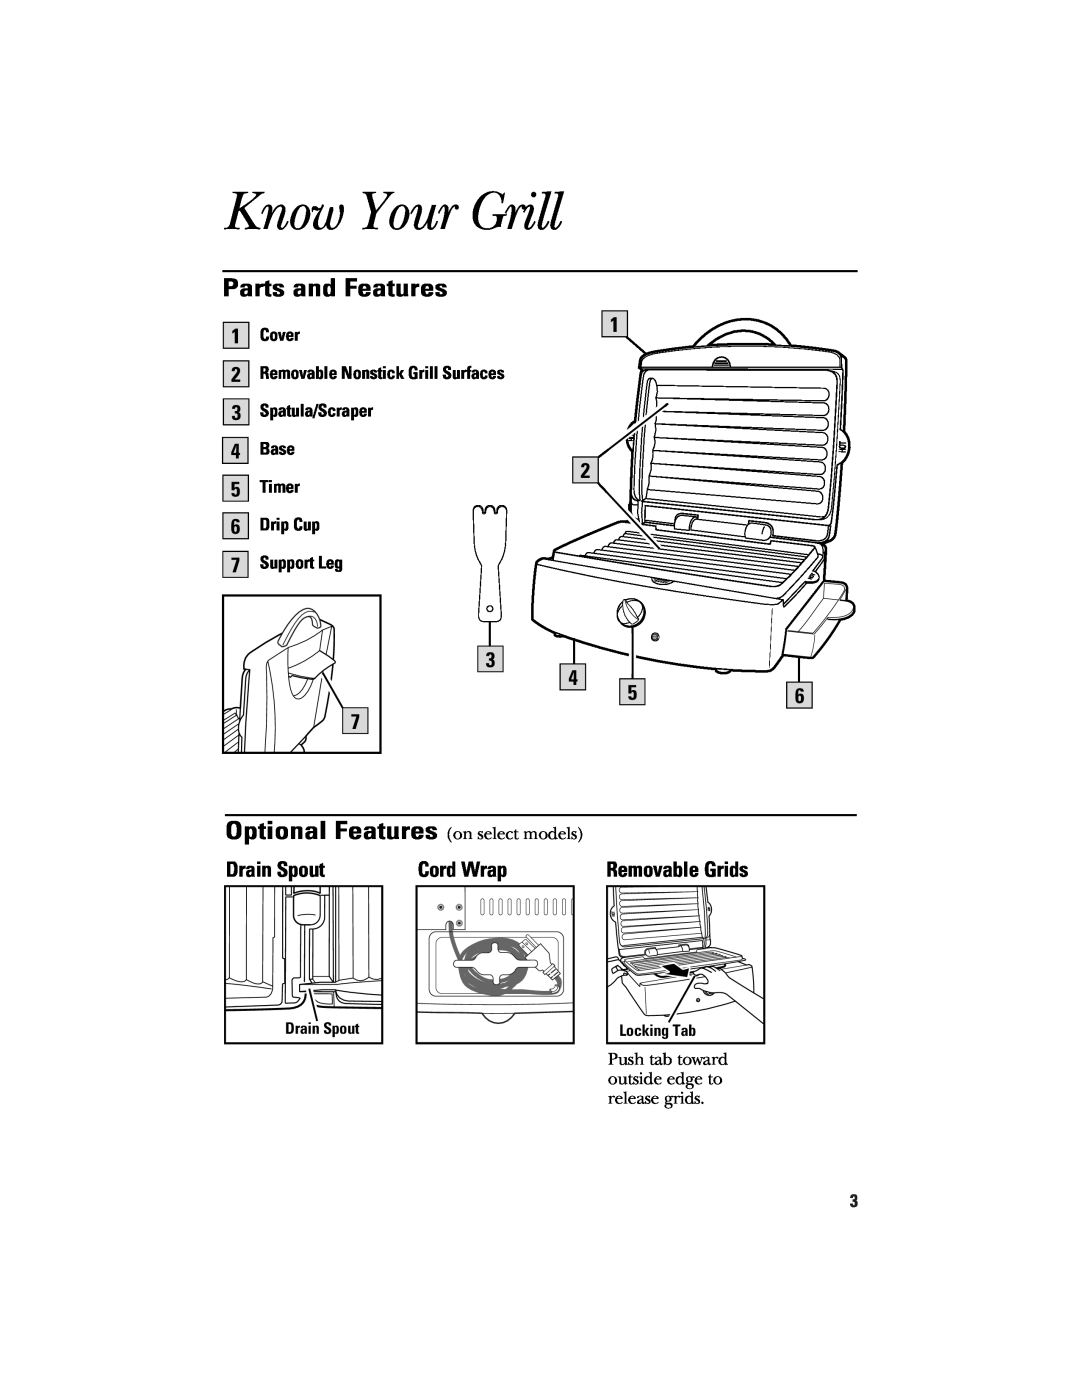 GE 106621 Know Your Grill, Parts and Features, Optional Features on select models, Cover, 3Spatula/Scraper, Base, Timer 